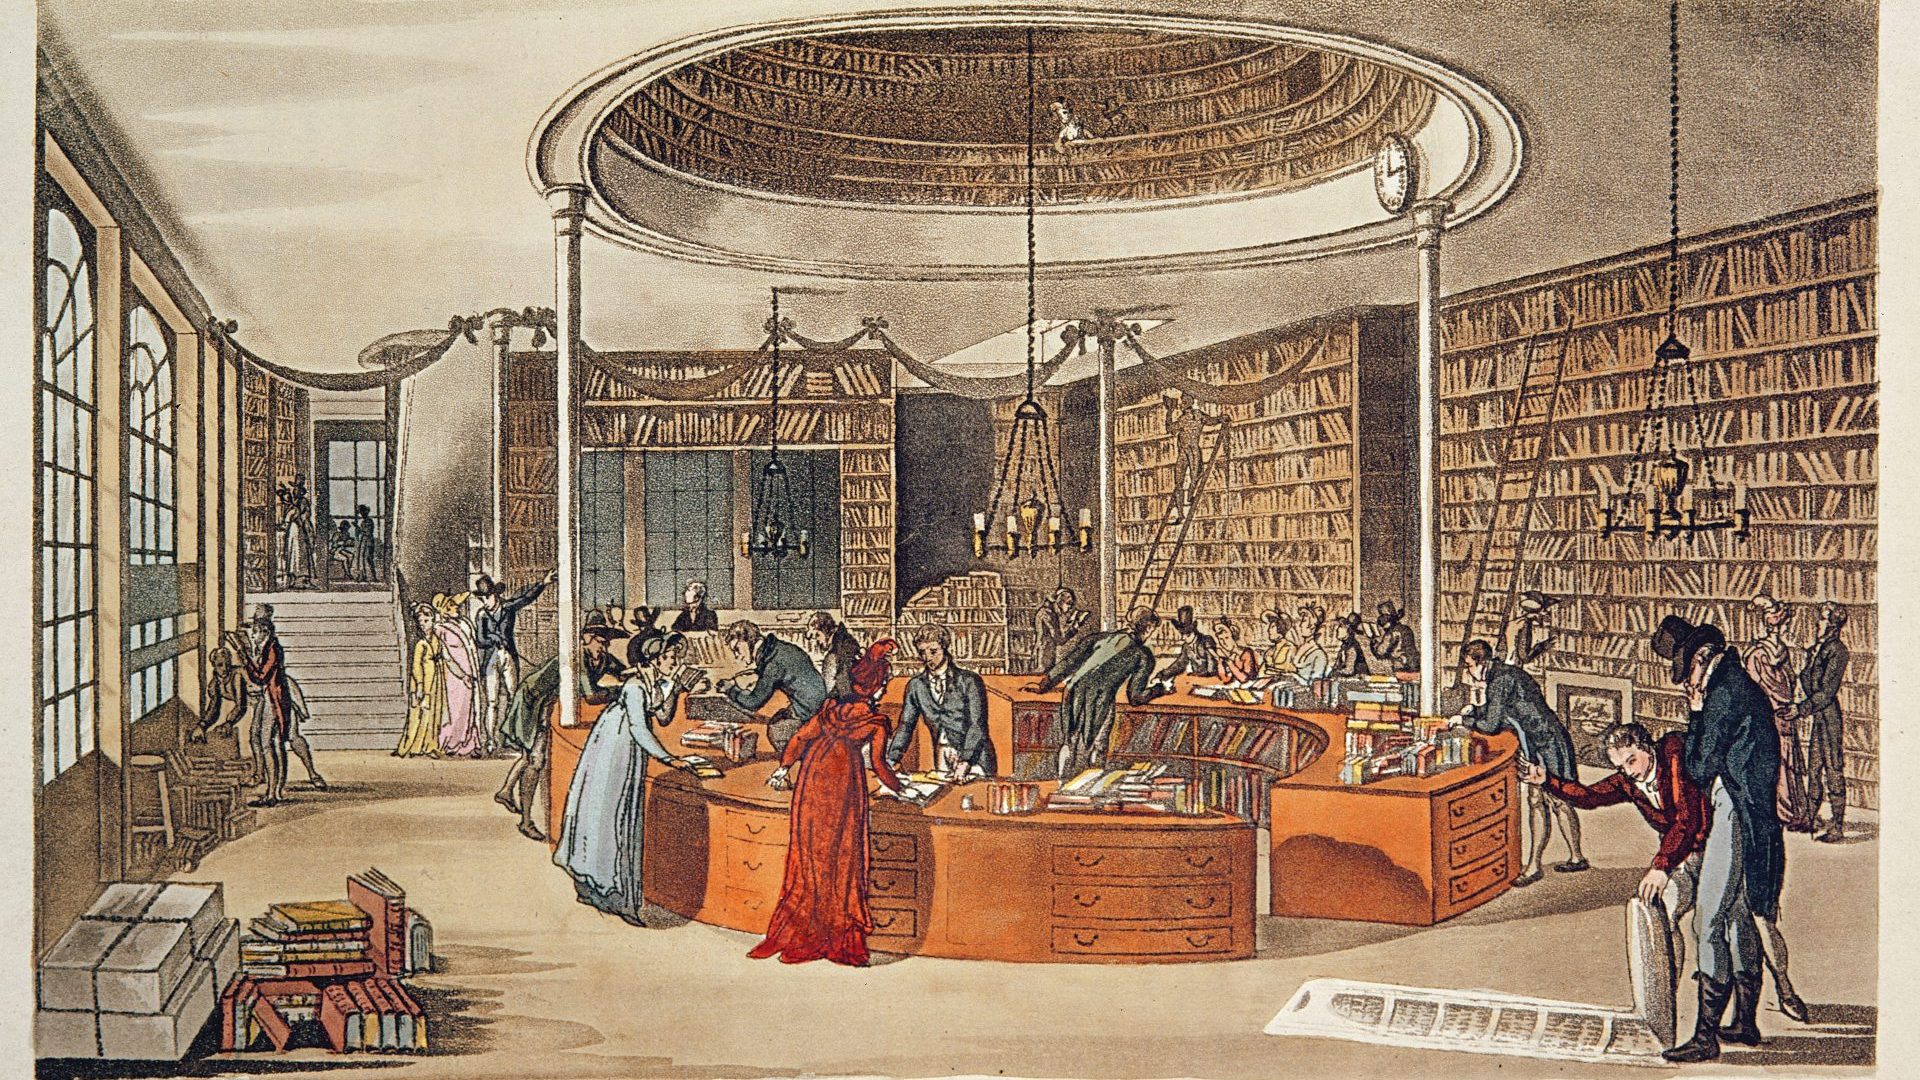 A hand-coloured etching of Messrs Lackington, Allen & Co, Temple of the Muses, Finsbury Square, London, 1809. Photo: Culture Club/Art Images/Getty